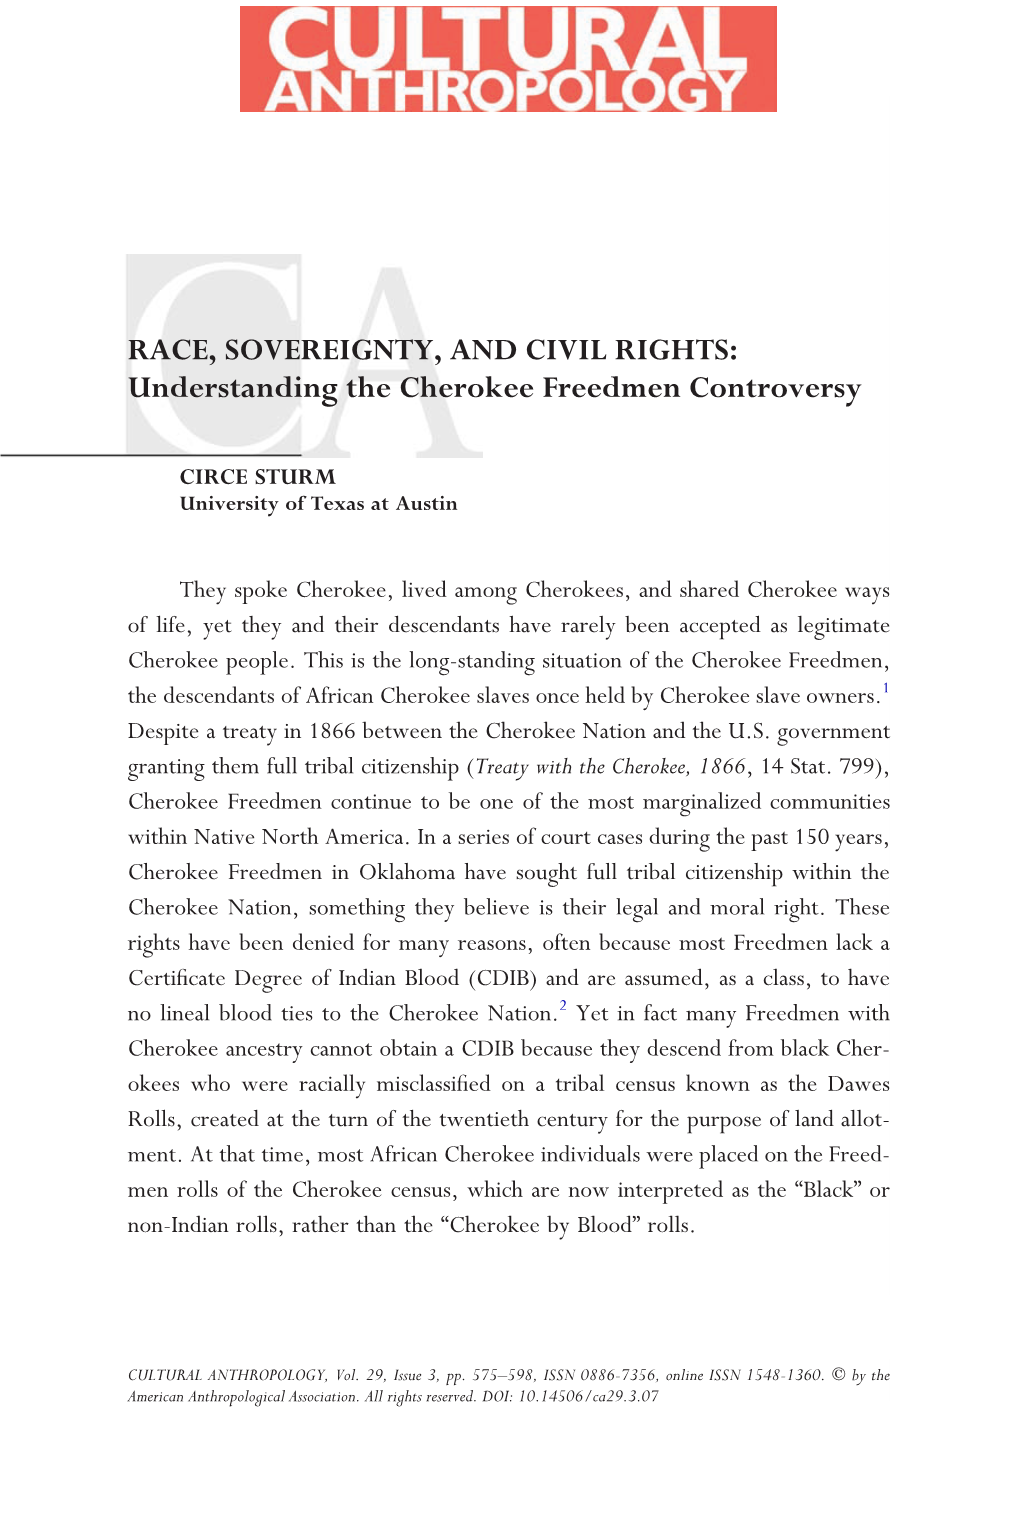 RACE, SOVEREIGNTY, and CIVIL RIGHTS: Understanding the Cherokee Freedmen Controversy